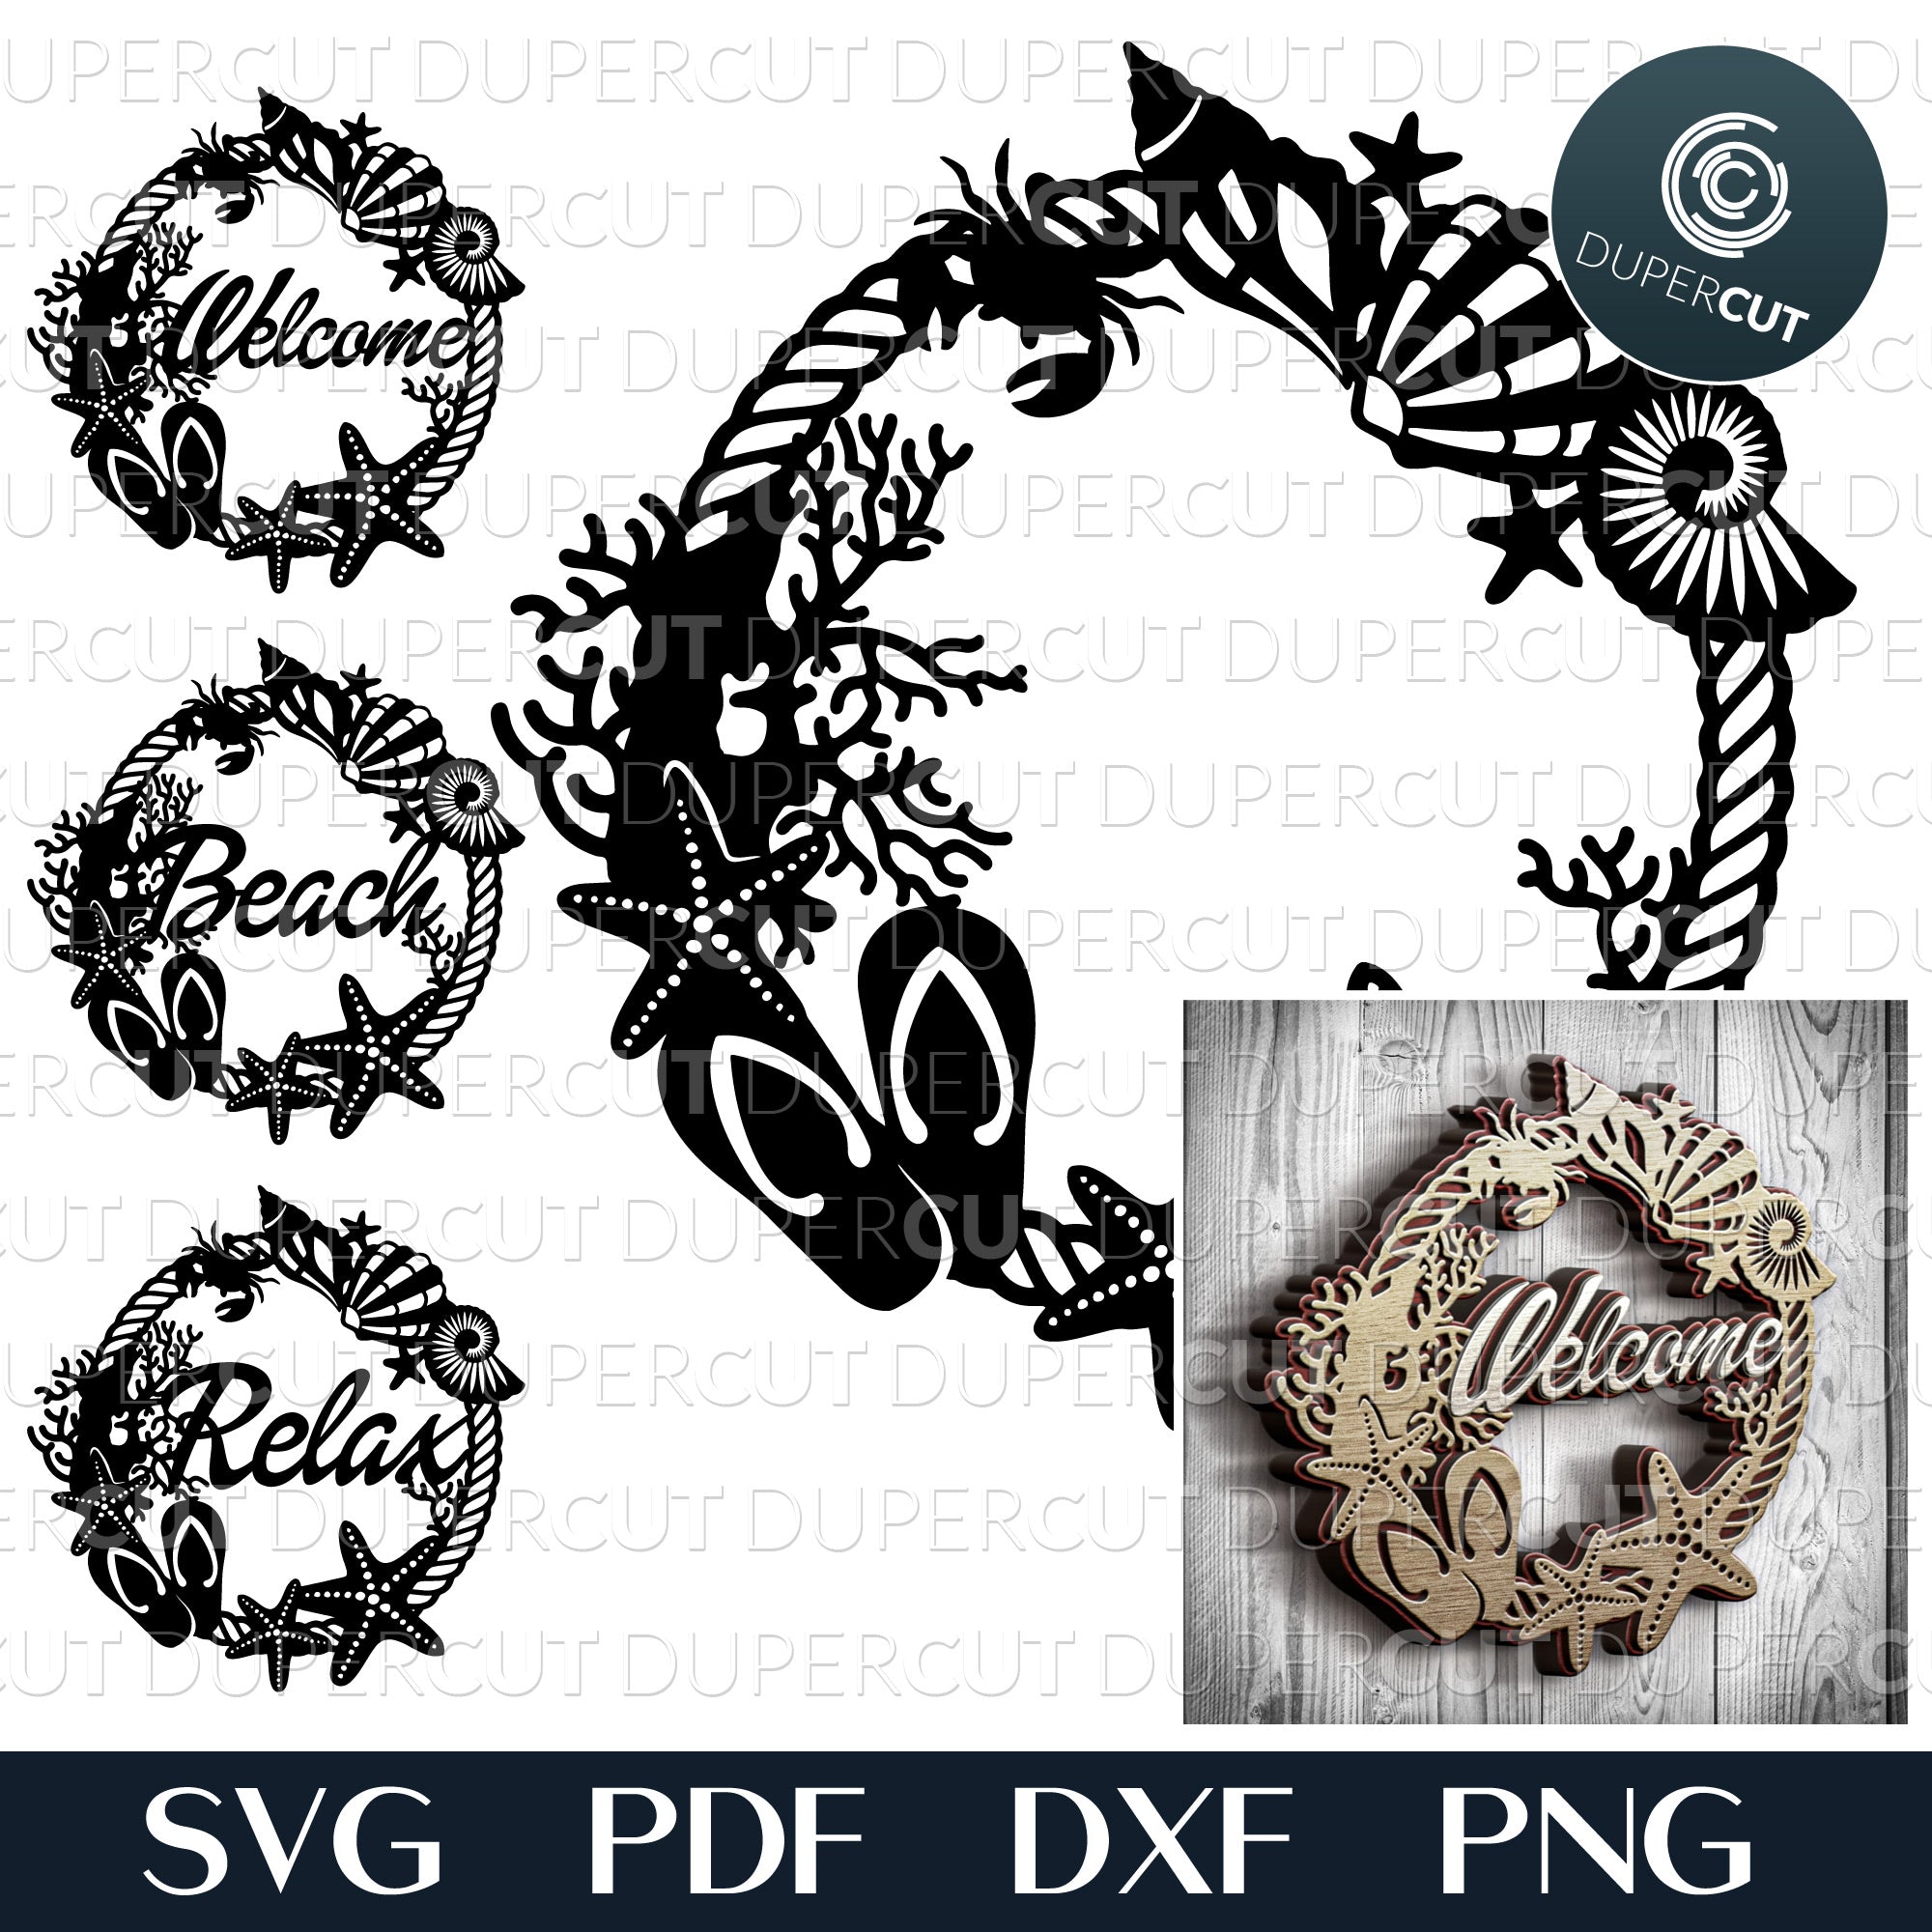 Download Vector Design Svg Template Layered Svg Seashell Laser Cut File Layered Art Seashell Svg Seashell Laser Cut Dxf File For Laser Drawing Illustration Art Collectibles Vadel Com